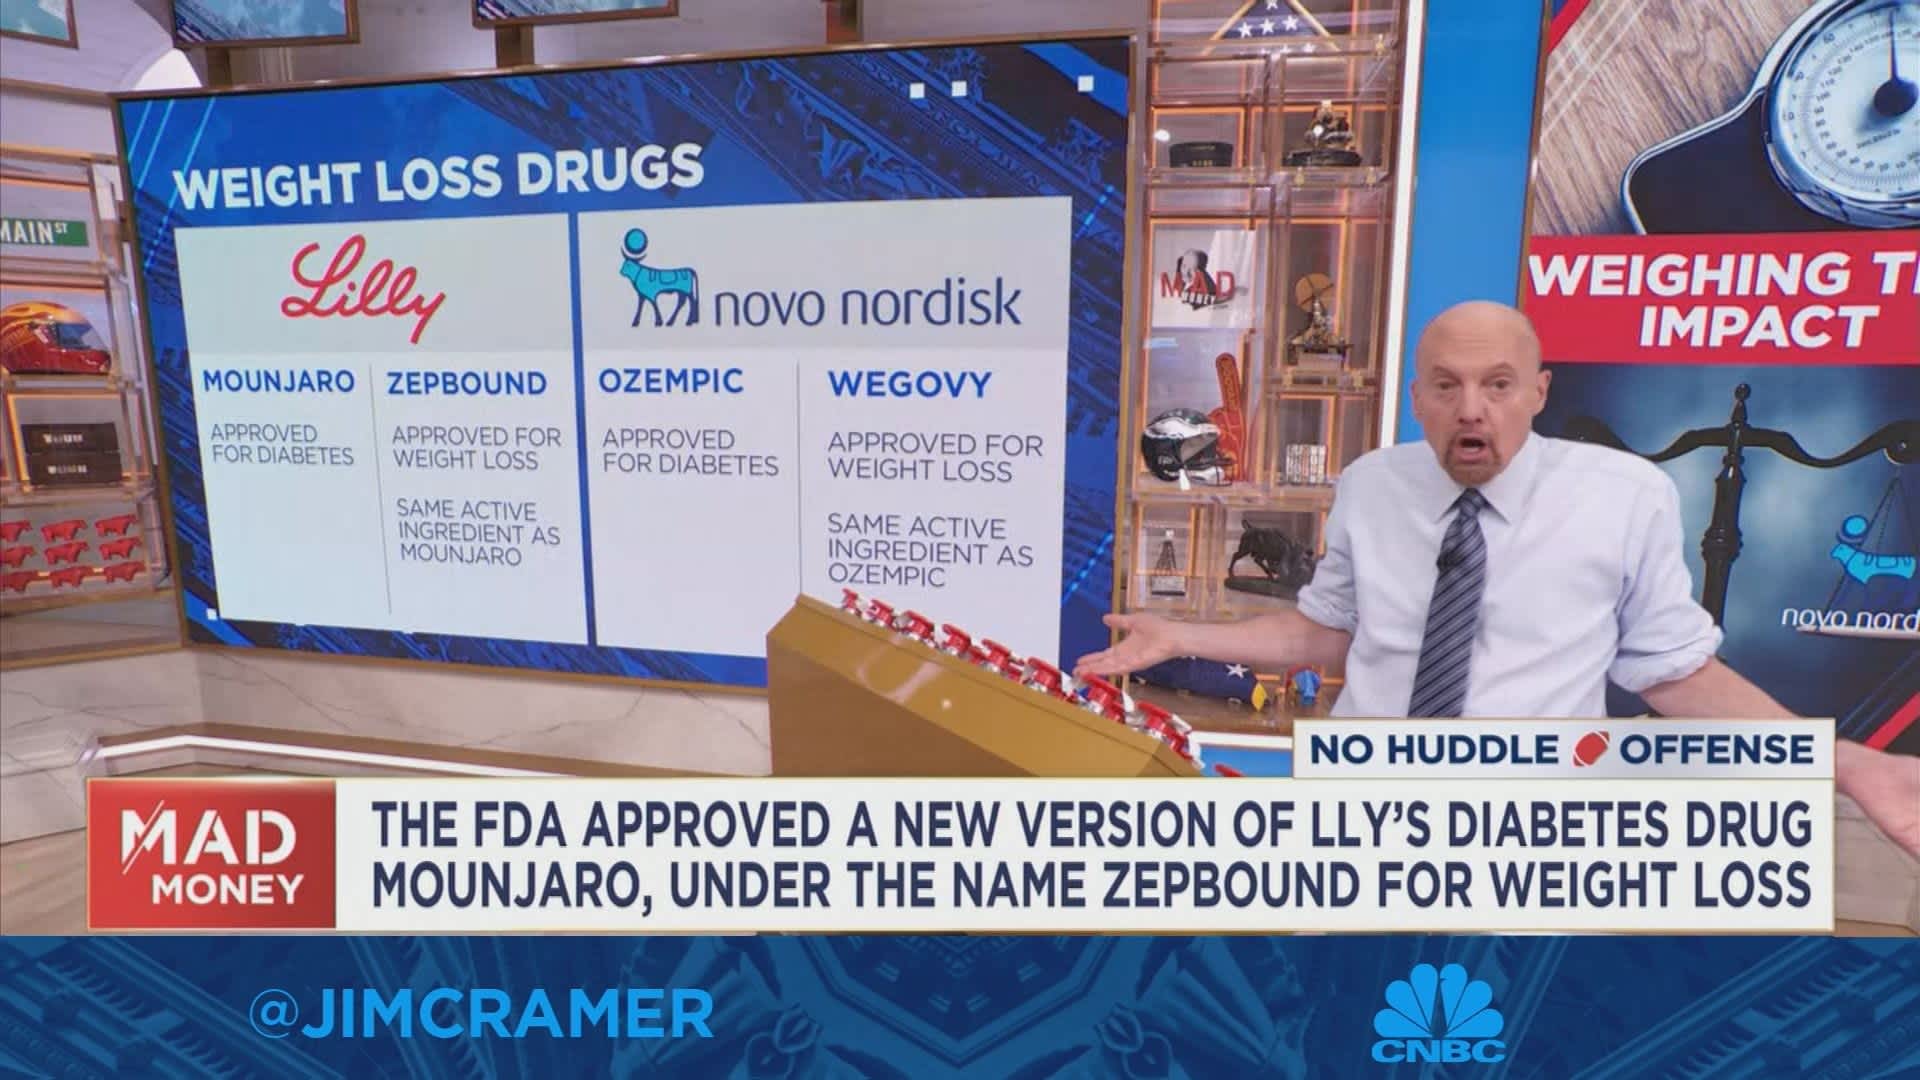 Jim Cramer explains why he favors Eli Lilly in the weight loss drug space